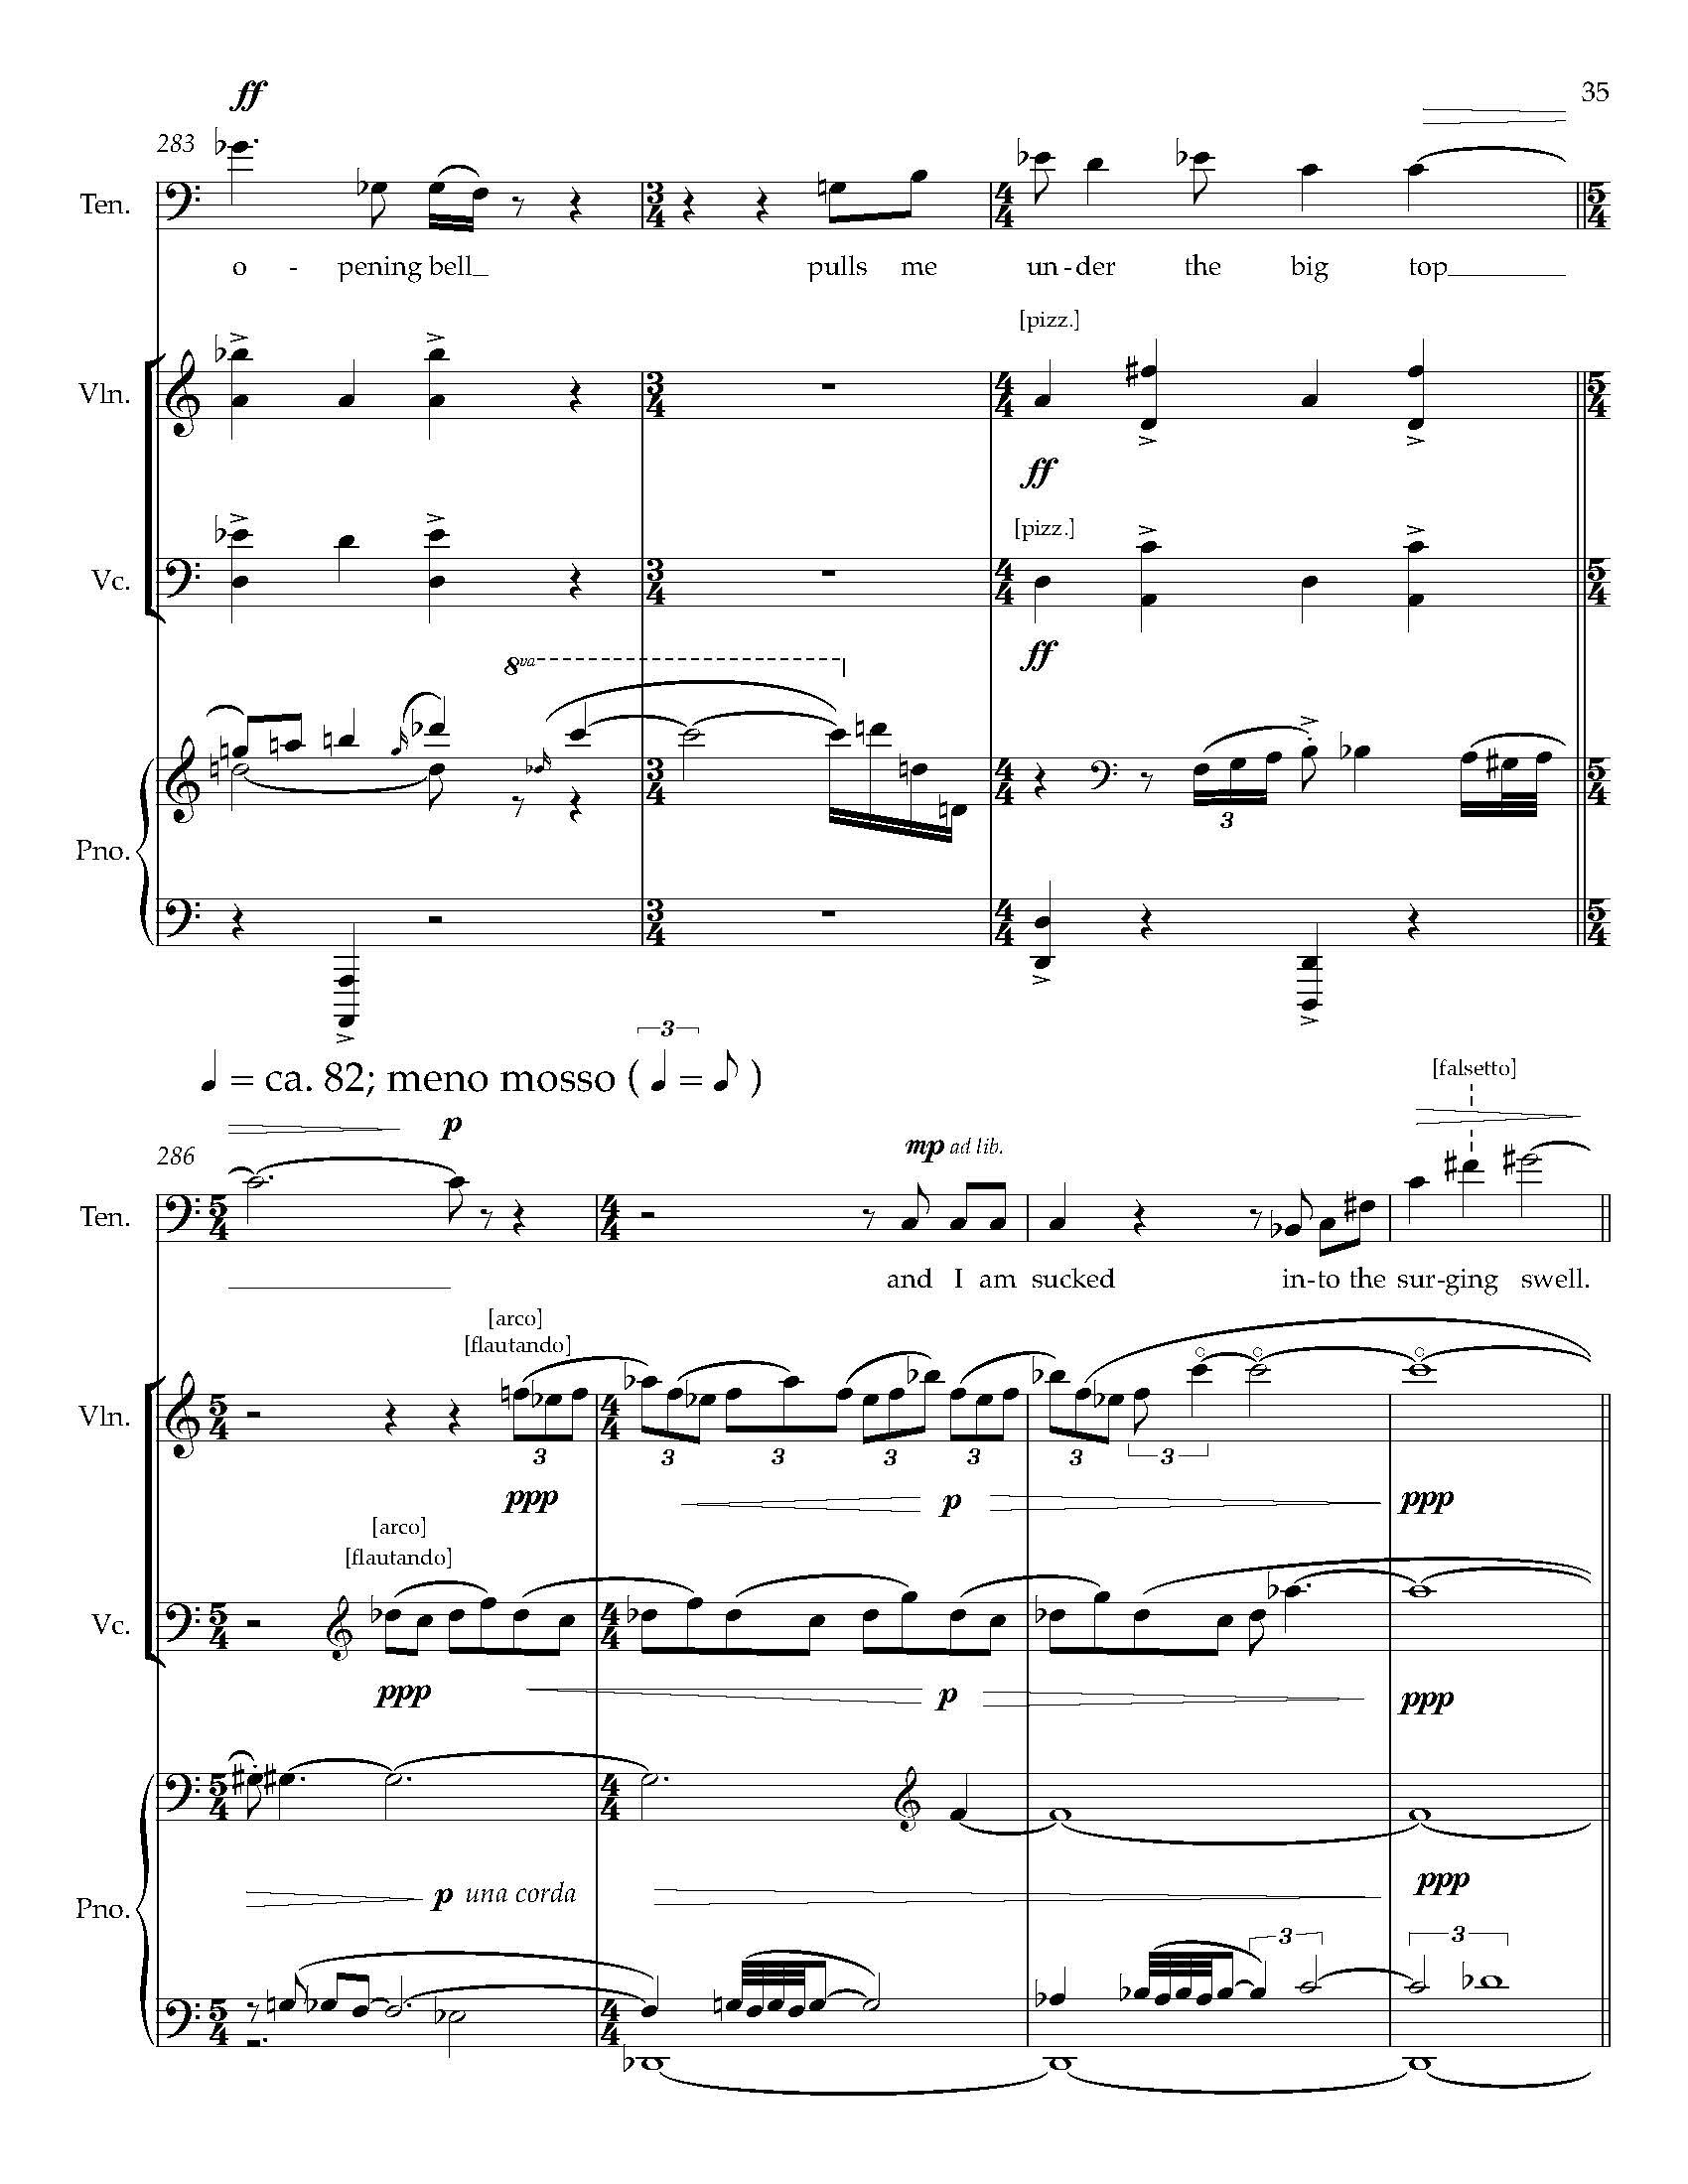 Gursky Songs - Complete Score_Page_43.jpg